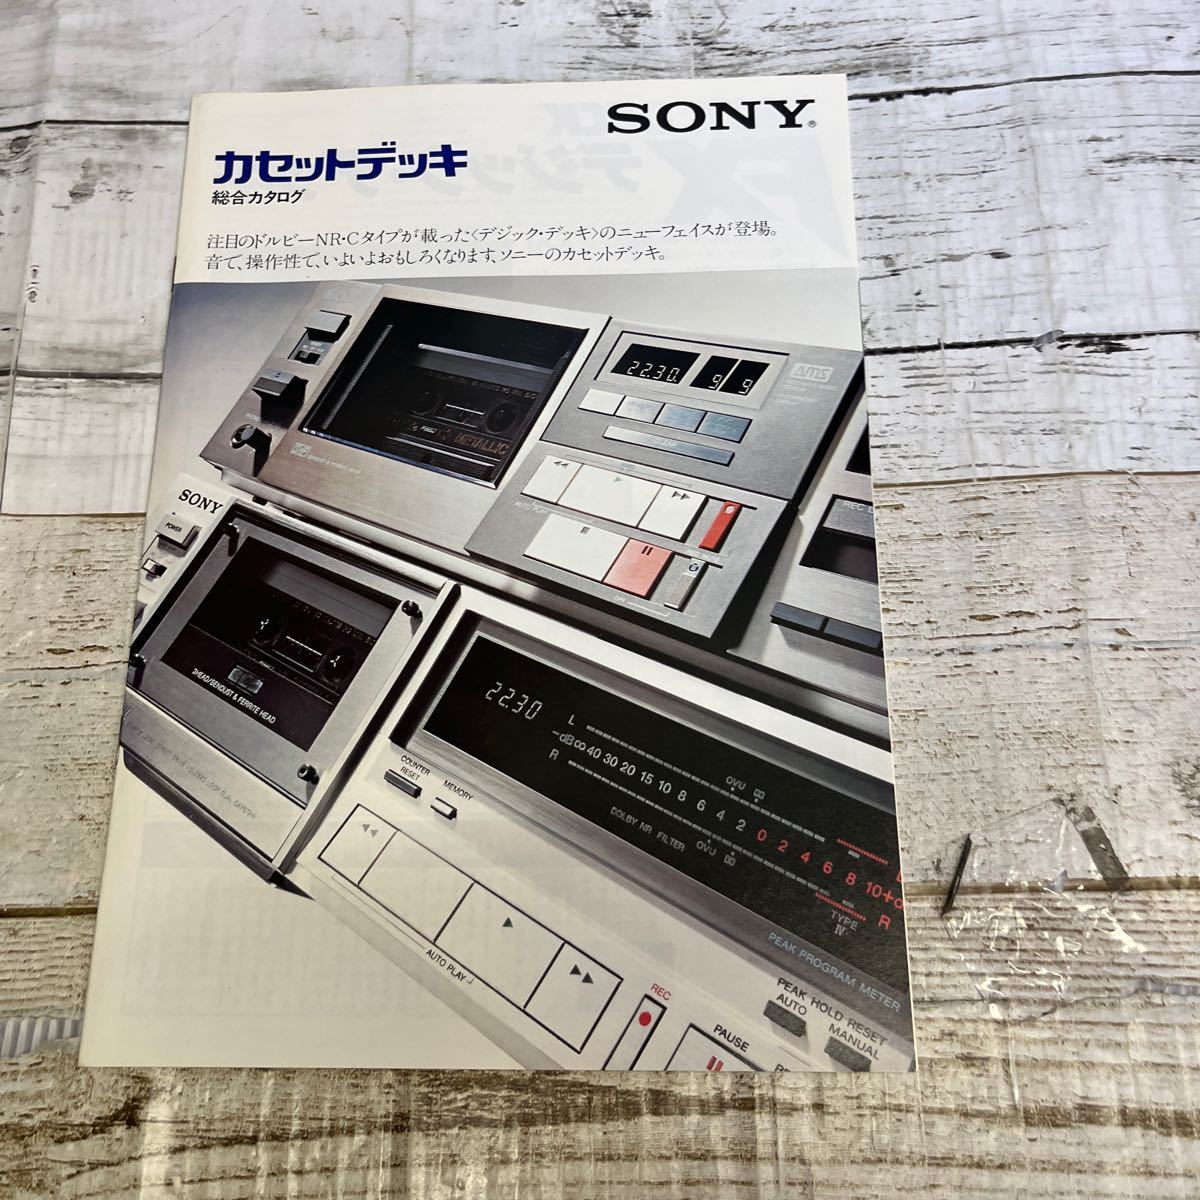 P359 [SONY( Sony ) cassette deck general catalogue Showa era 56 year 1 month ]TC-FX6/TC-FX7/TC-K777/TC-K75/TC-K71/TC-K65/TC-K61/TC-K22/ another 